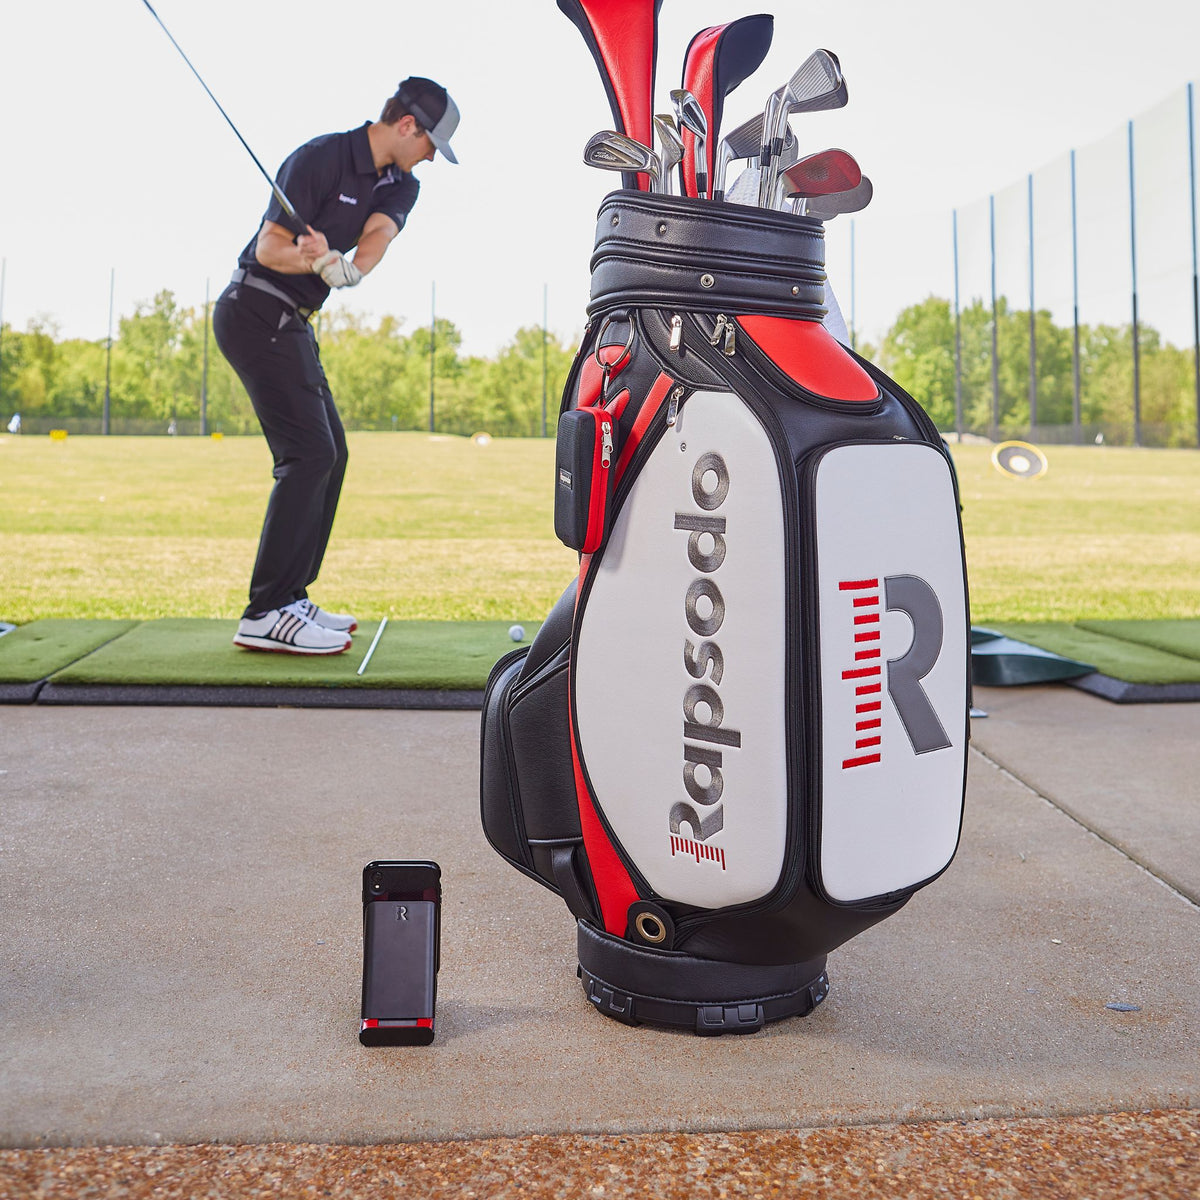 Rapsodo Mobile Launch Monitor with golfer on a driving range.